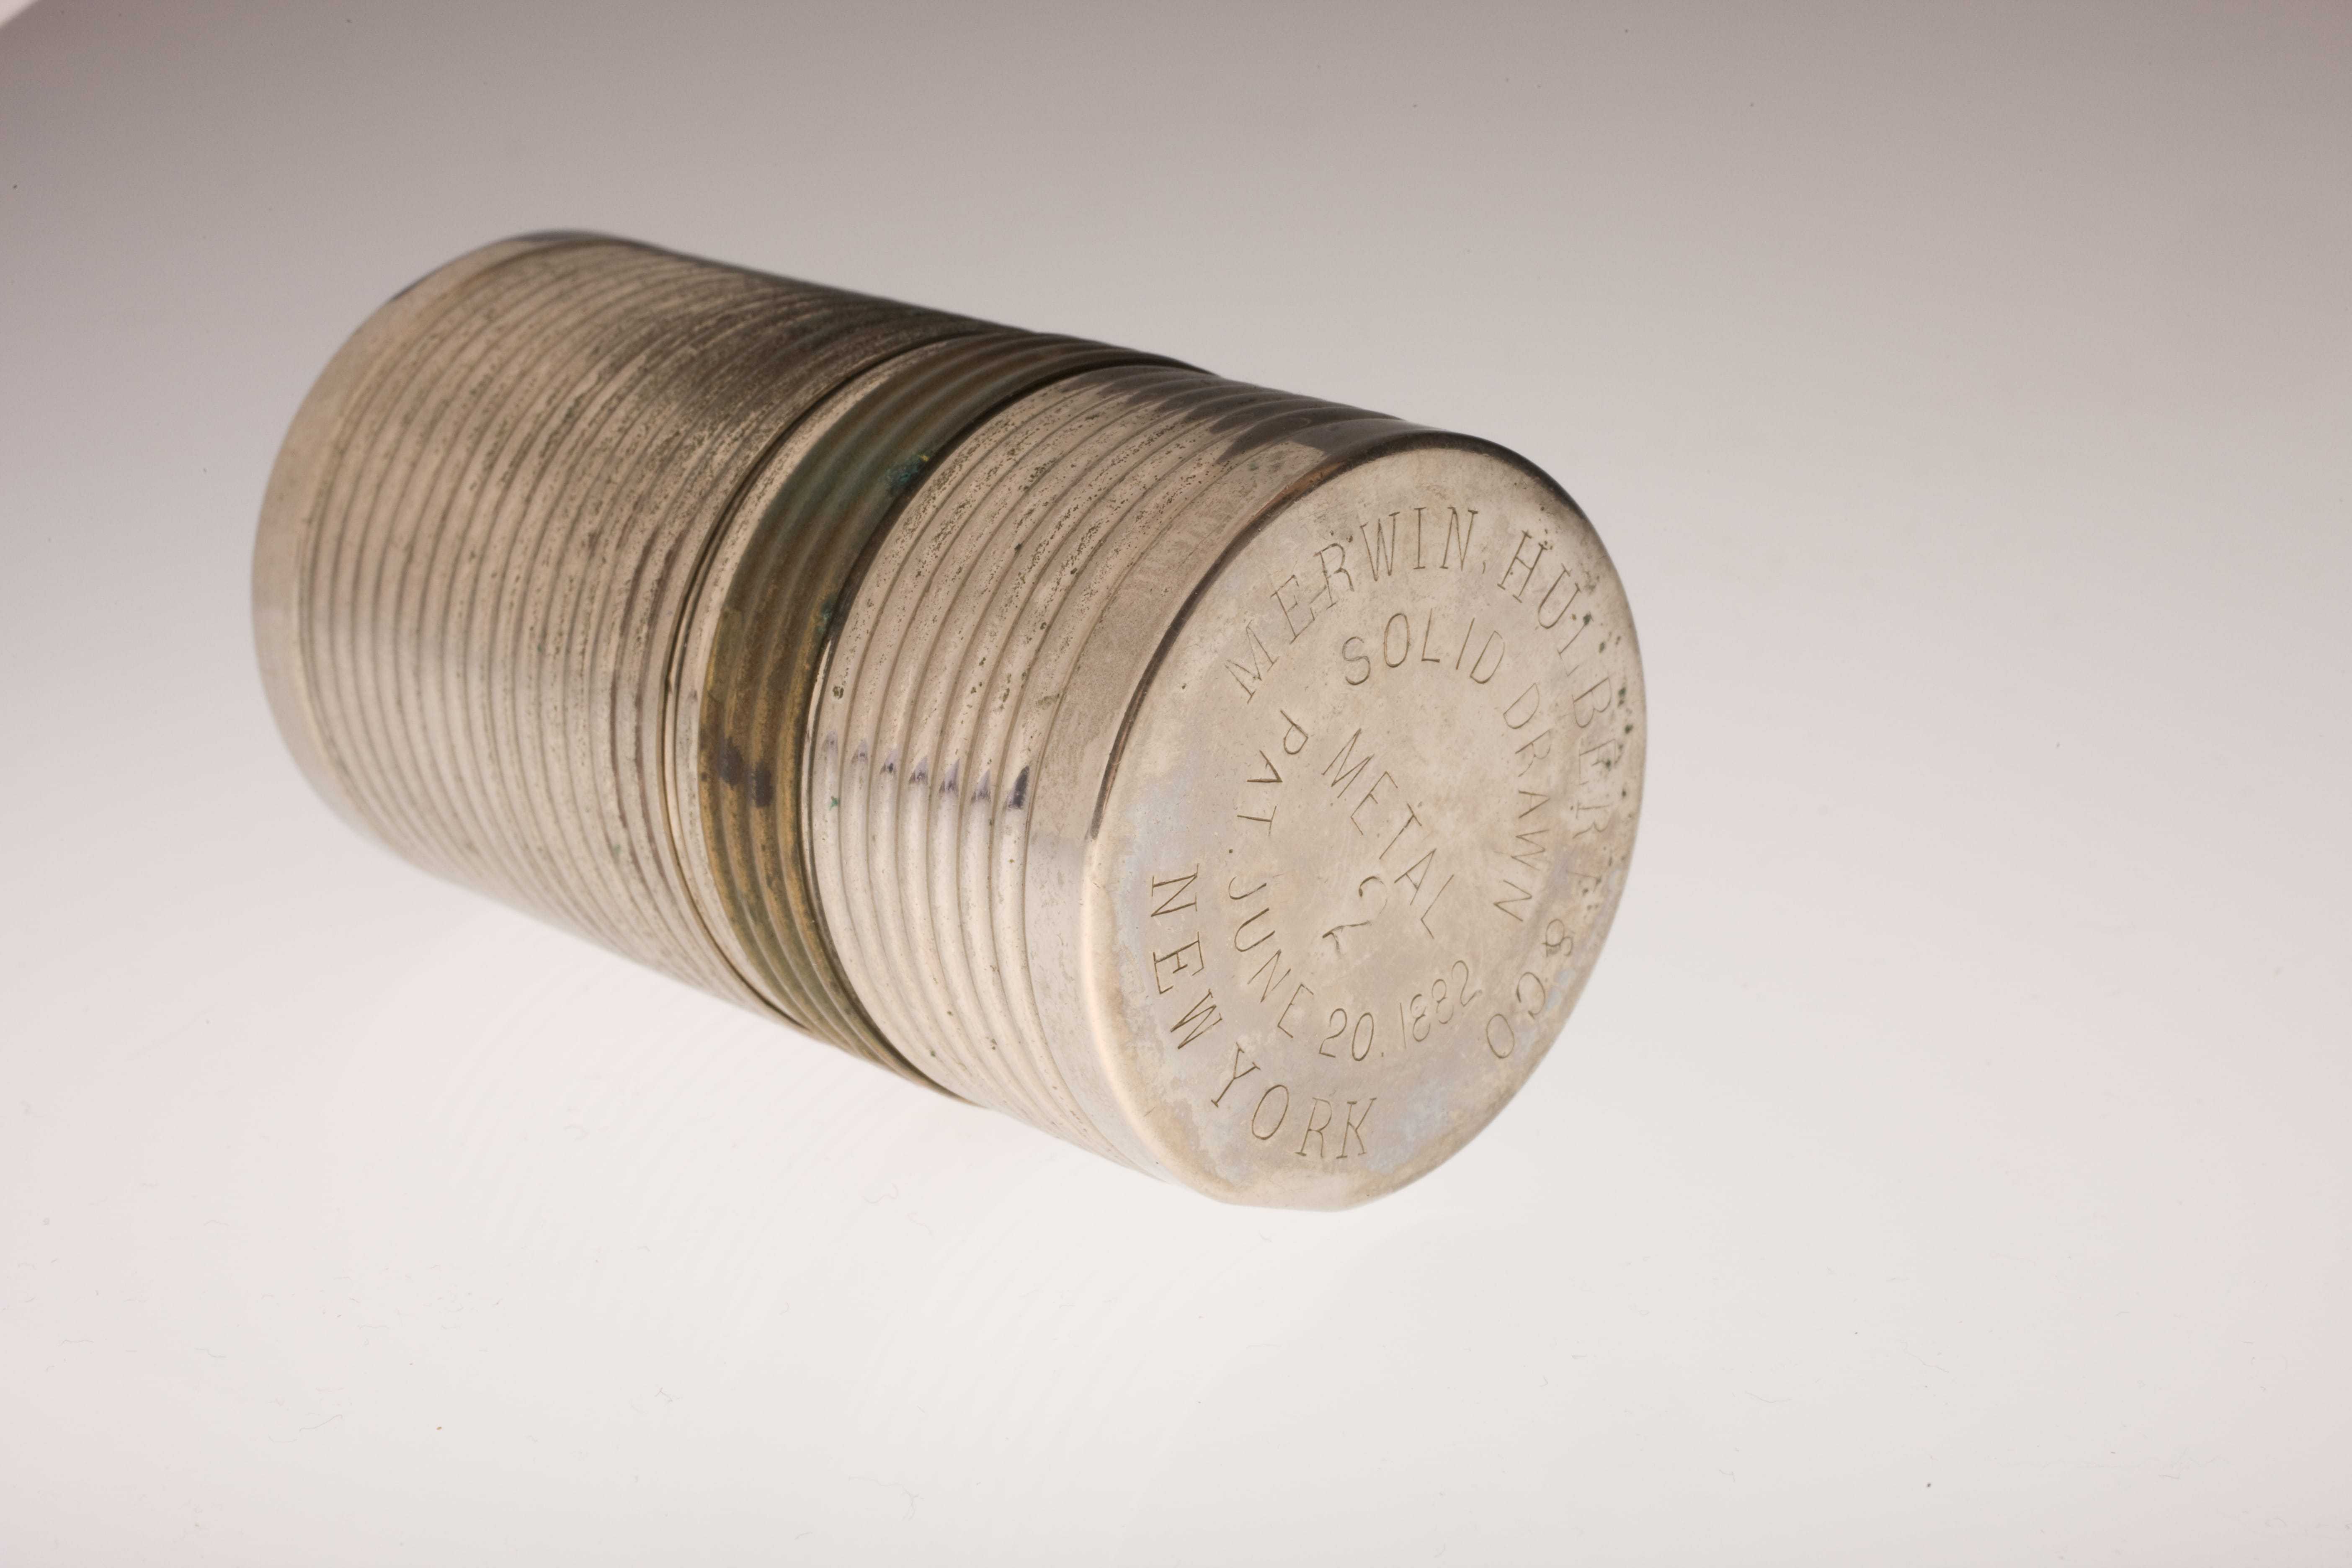 A cylindrical metal case with manufacturing information engraved on the end